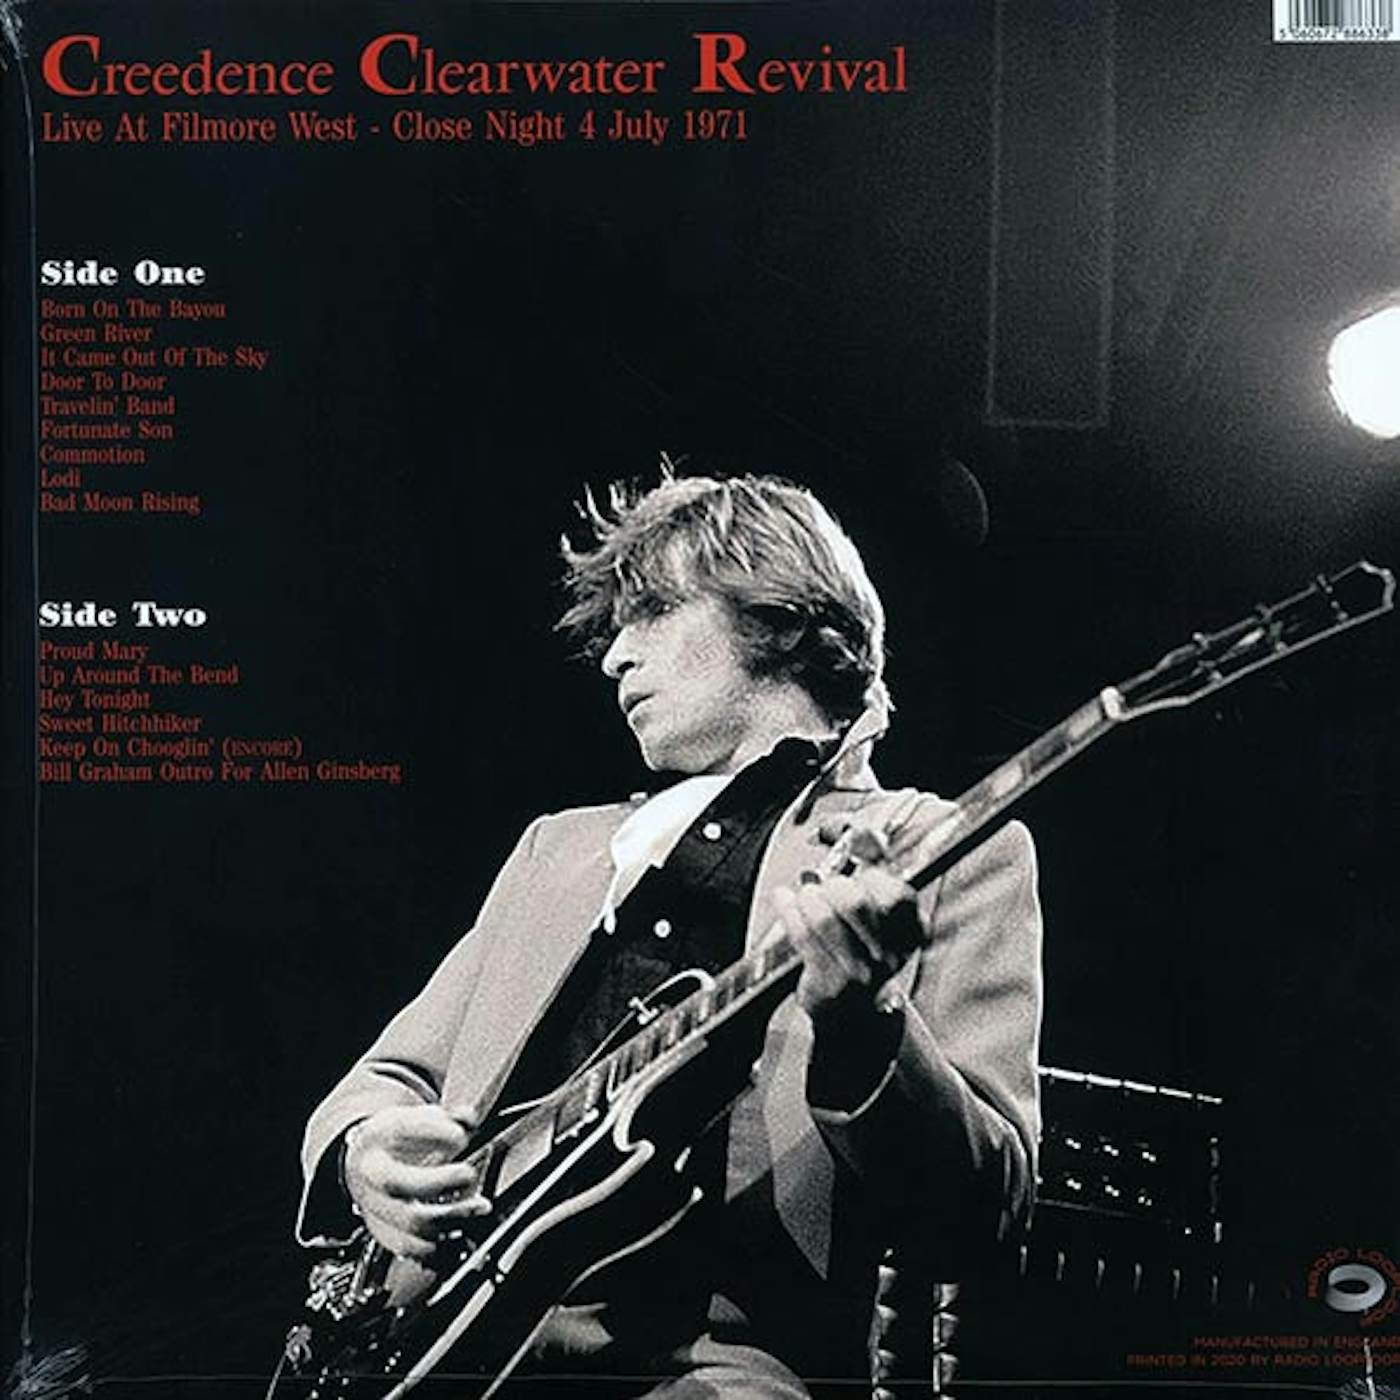 Creedence Clearwater Revival  LP -  Live At Fillmore West: Close Night 4 July 1971 (Vinyl)